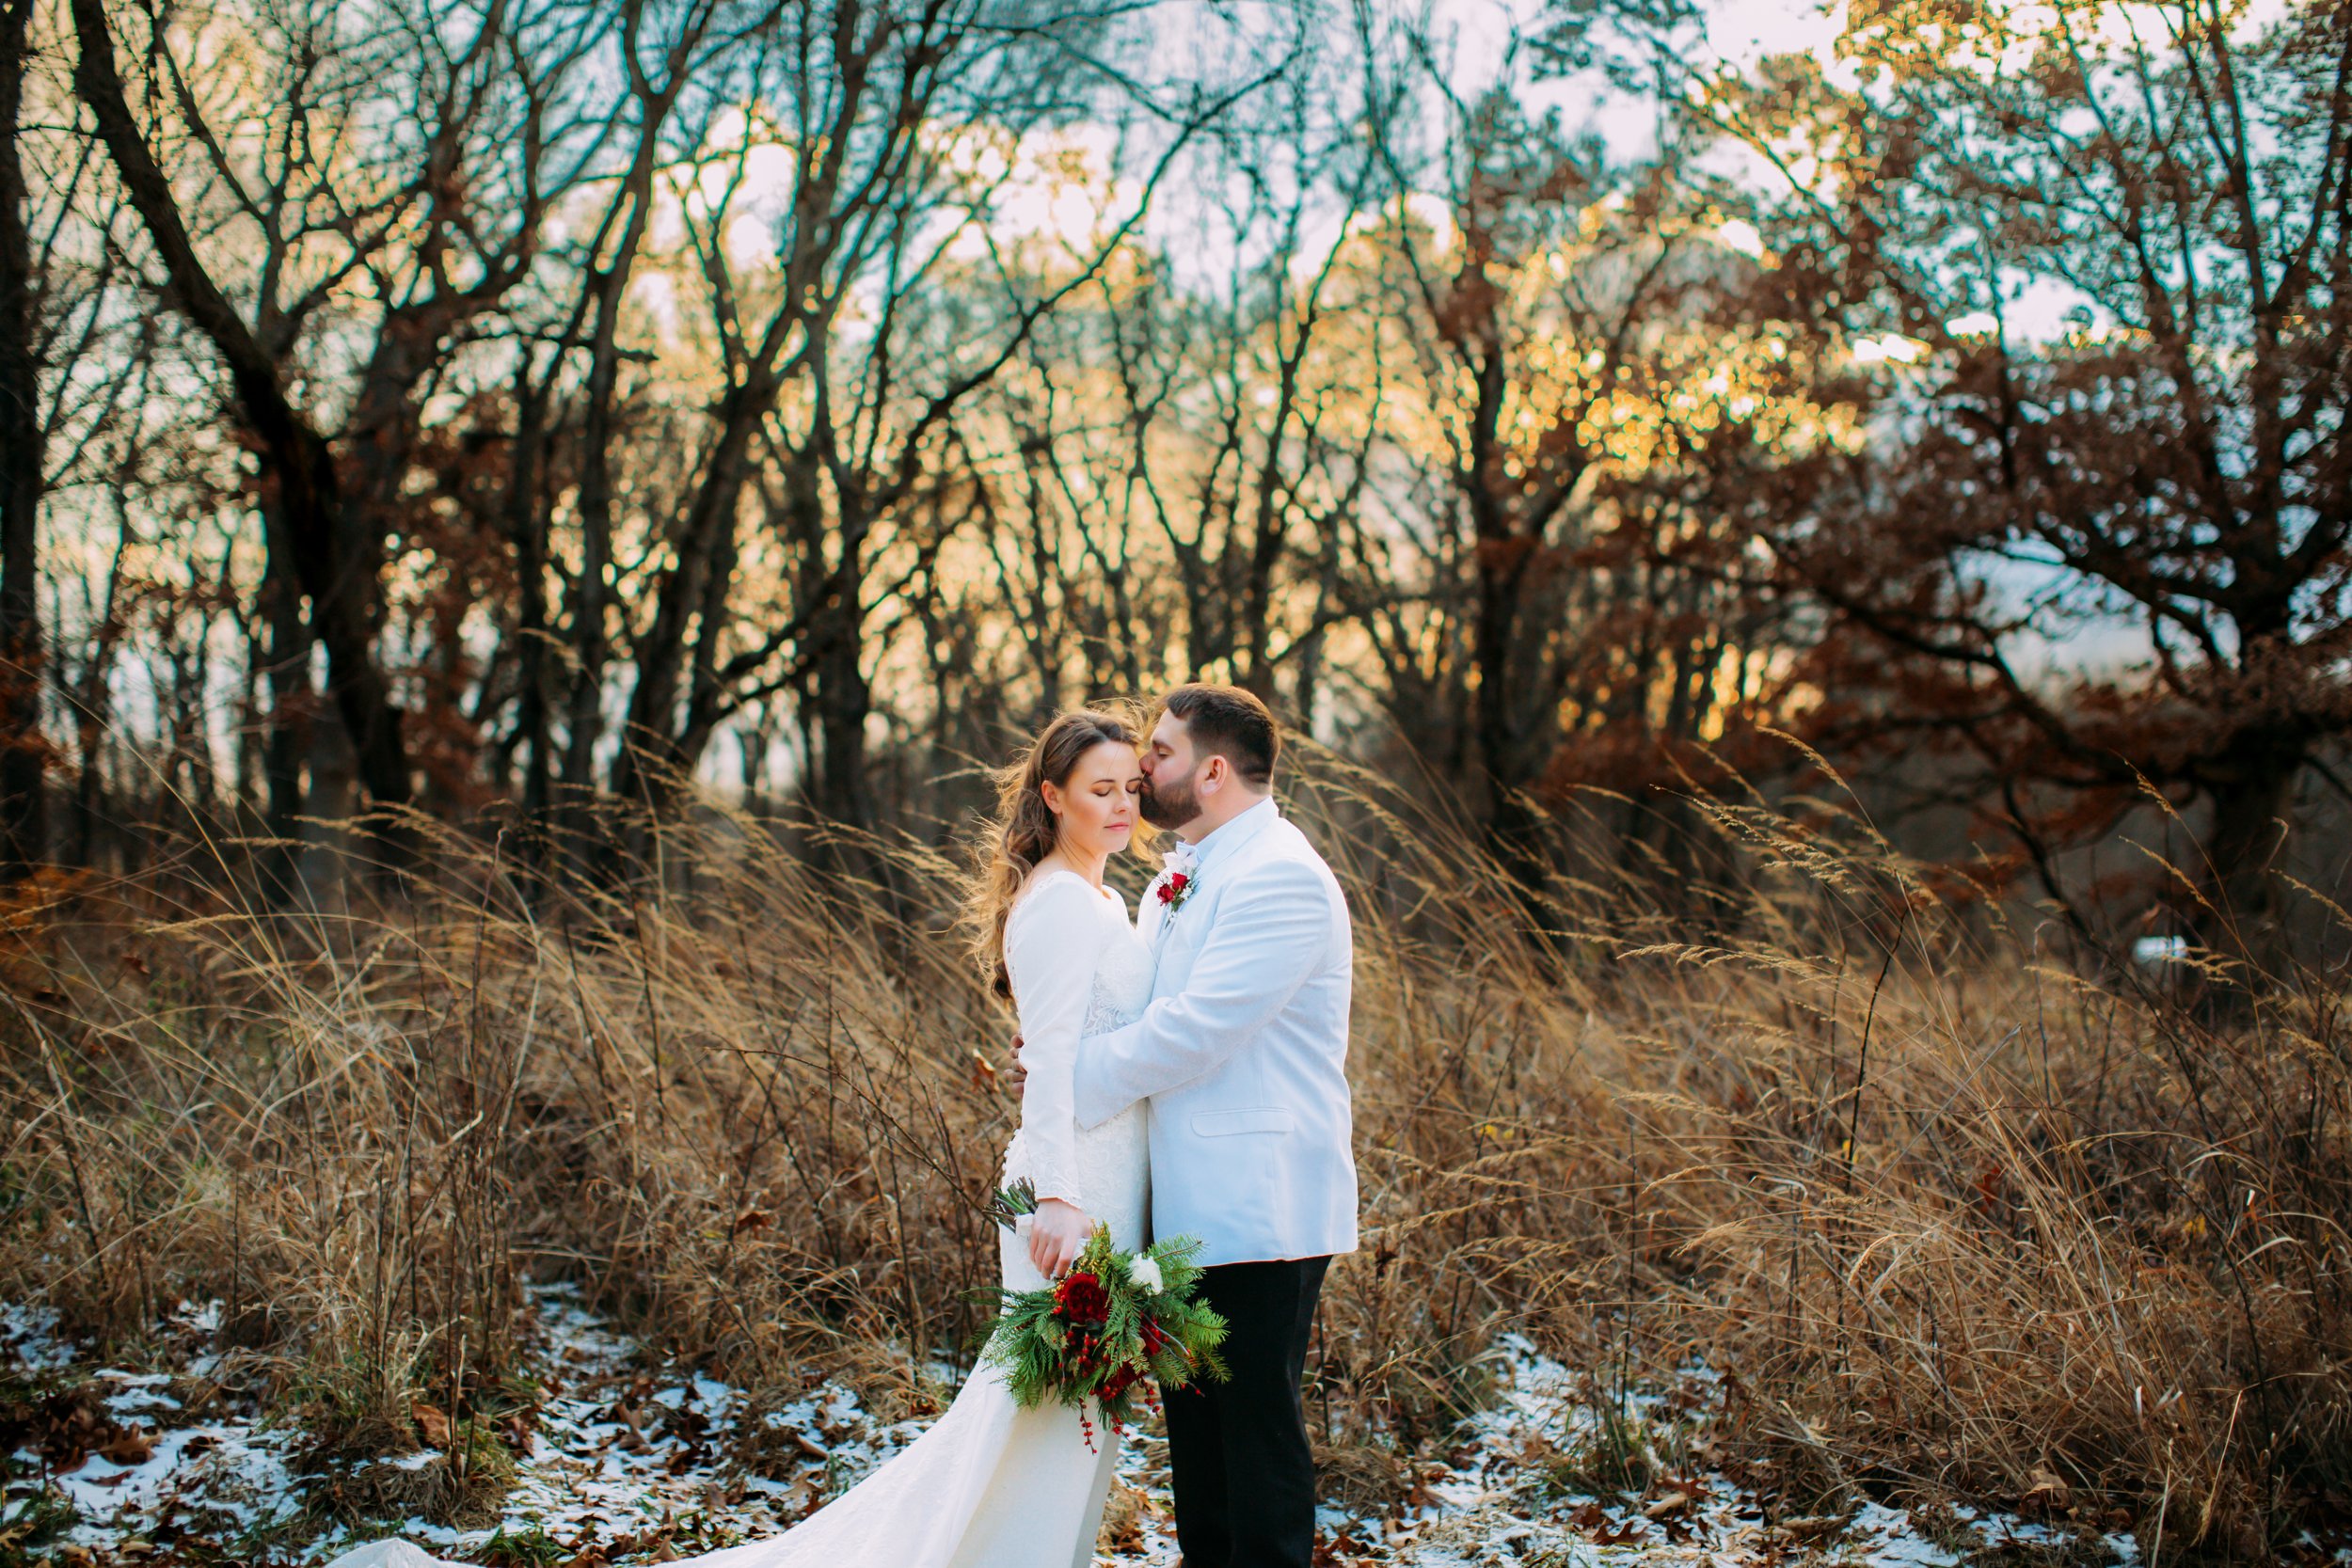  Winter wedding in LaSalle by Teala Ward Photography with beautiful scenery in the background. winter wedding dress #TealaWardPhotography #TealaWardWeddings #LaSalleWedding #churchwedding #Illinoisweddingphotographer #LaSalle,IL 